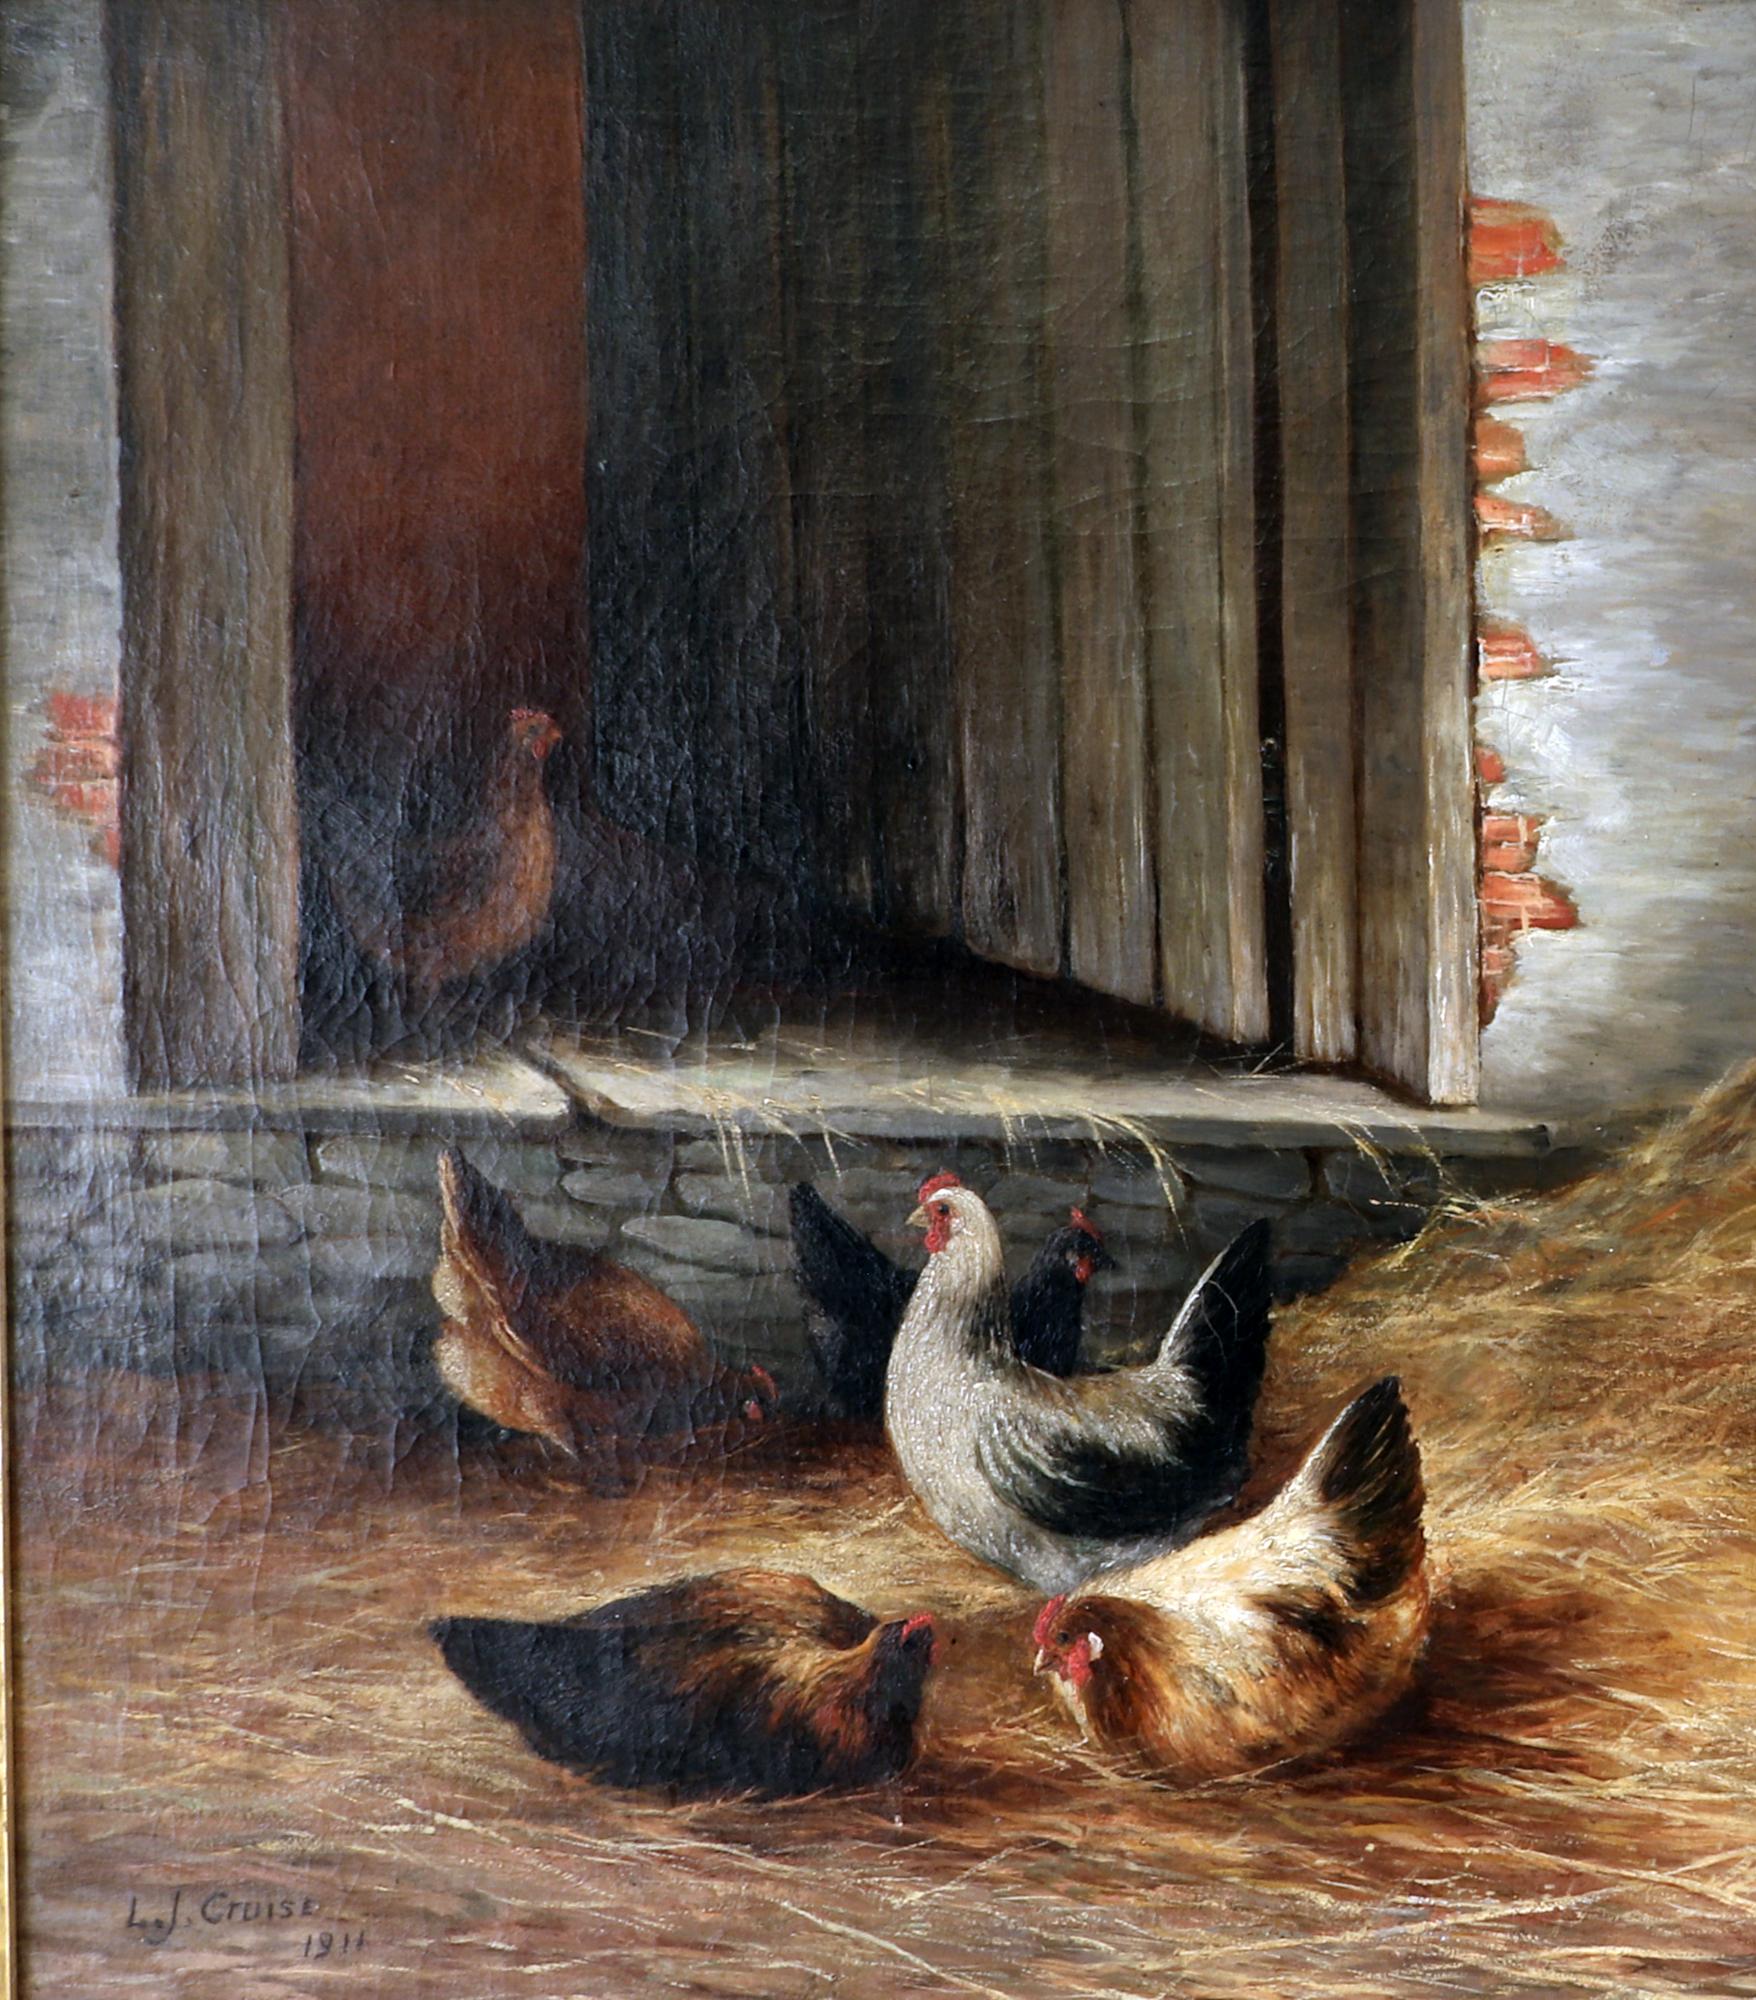 American Painting of Farmyard Scene with chickens, Oil on Canvas, Signed L.J. Cruise For Sale